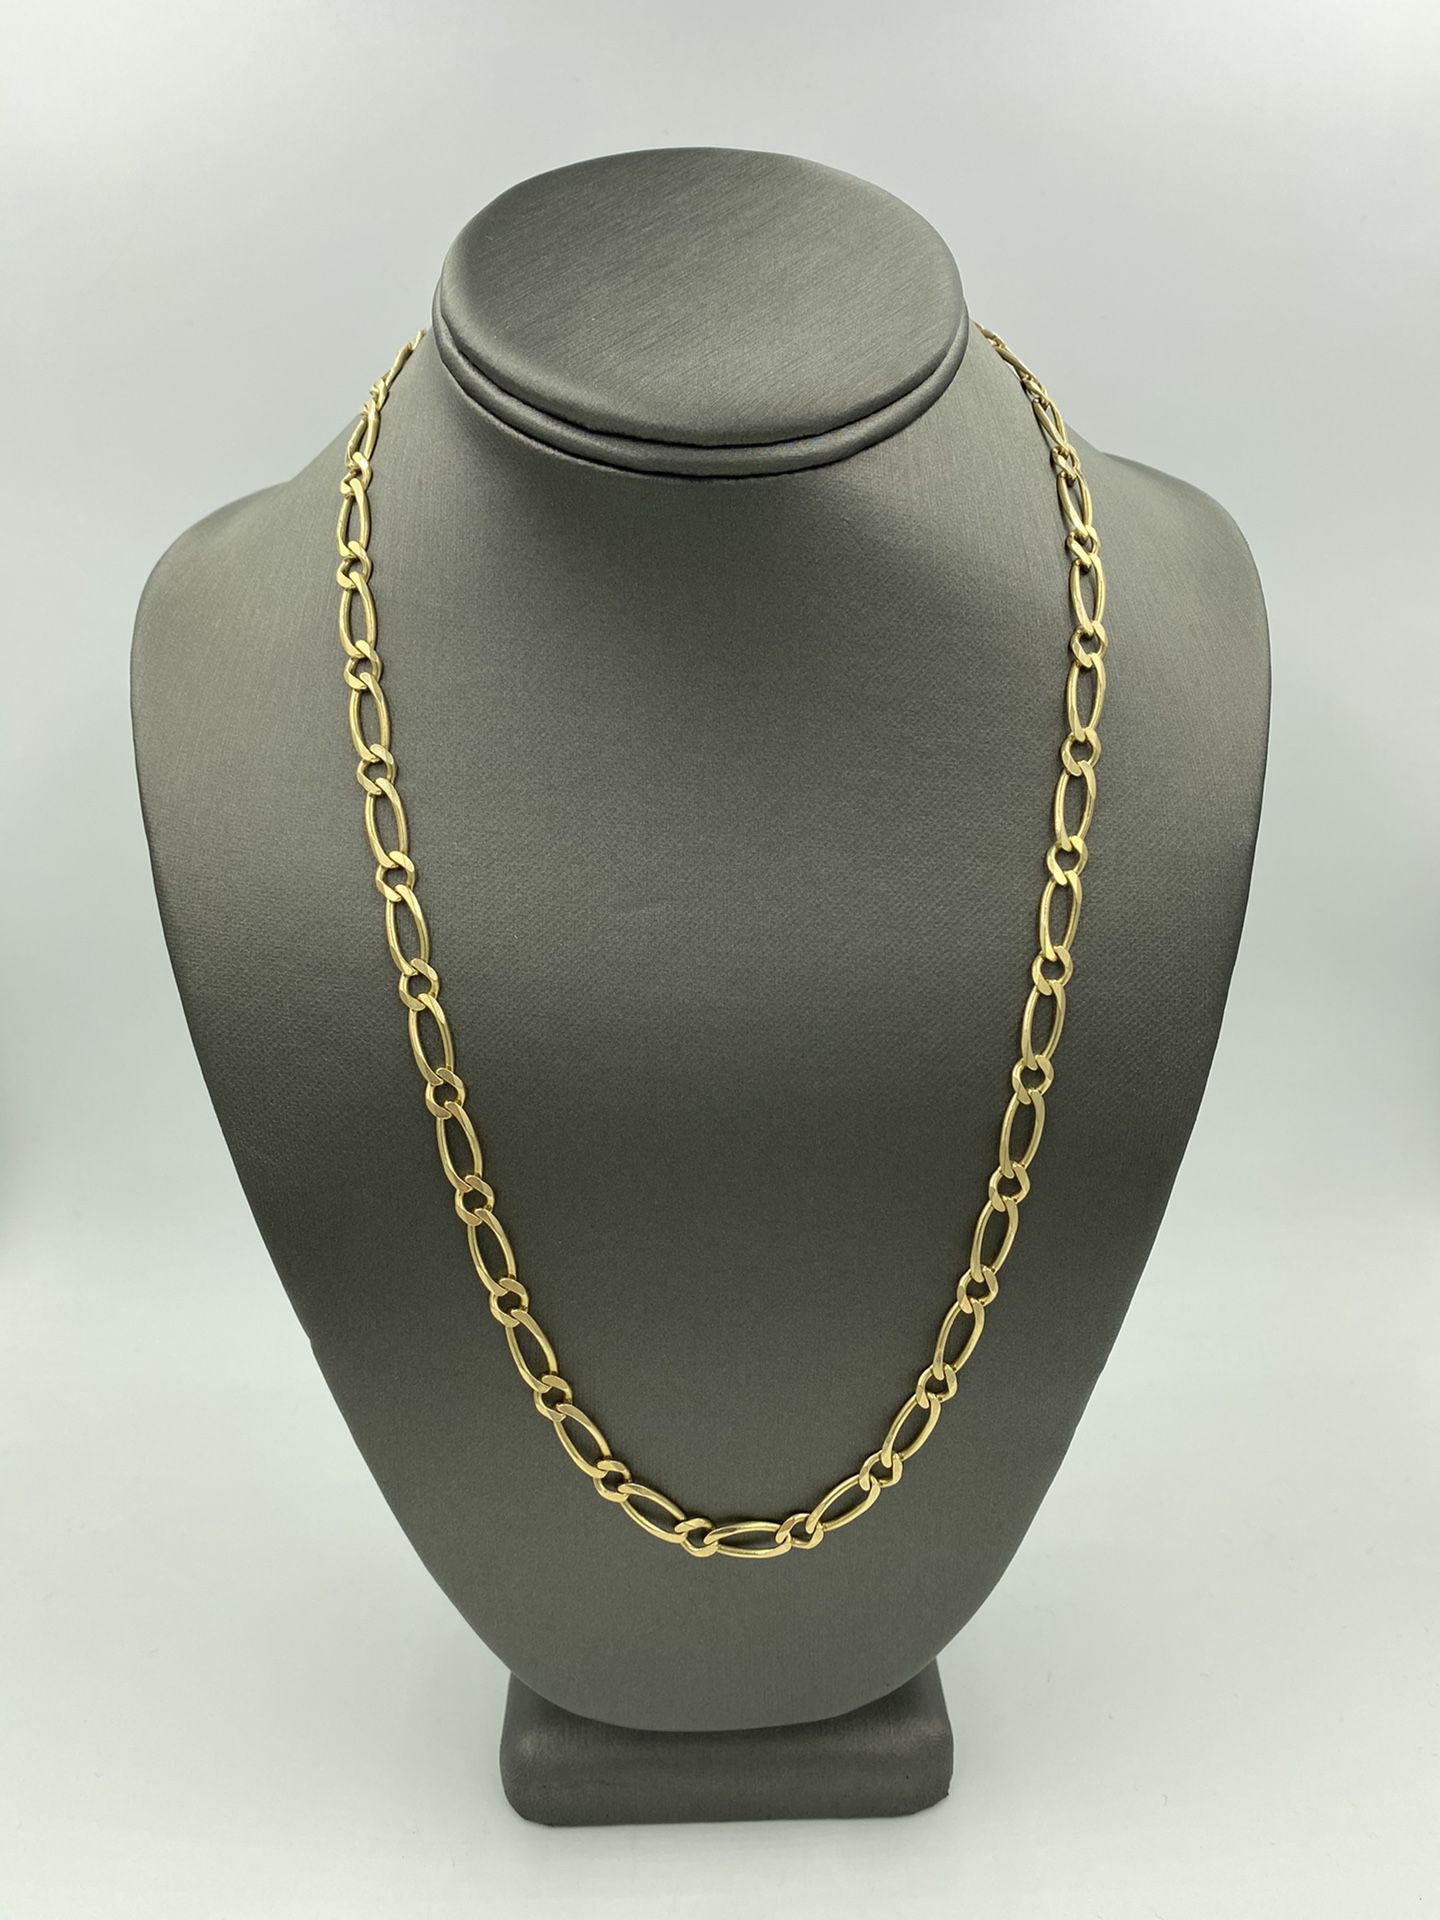 14KT YELLOW GOLD “UNIQUE” FIGARO LINK CHAIN 22”